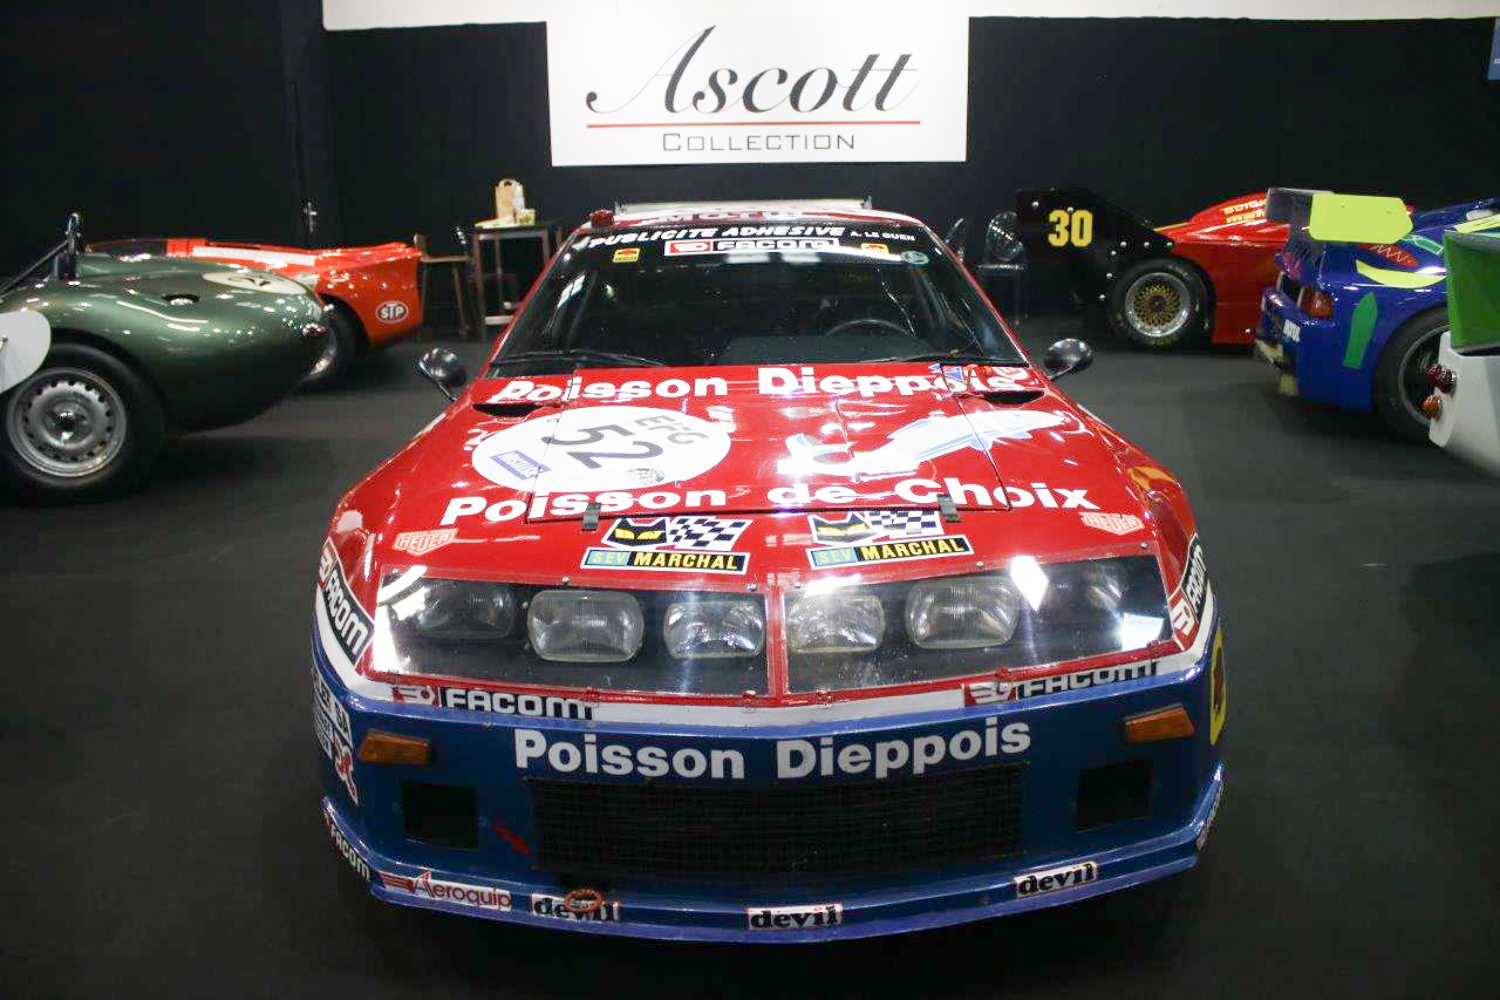 The Ascott Collection's 1977 ALPINE A310.